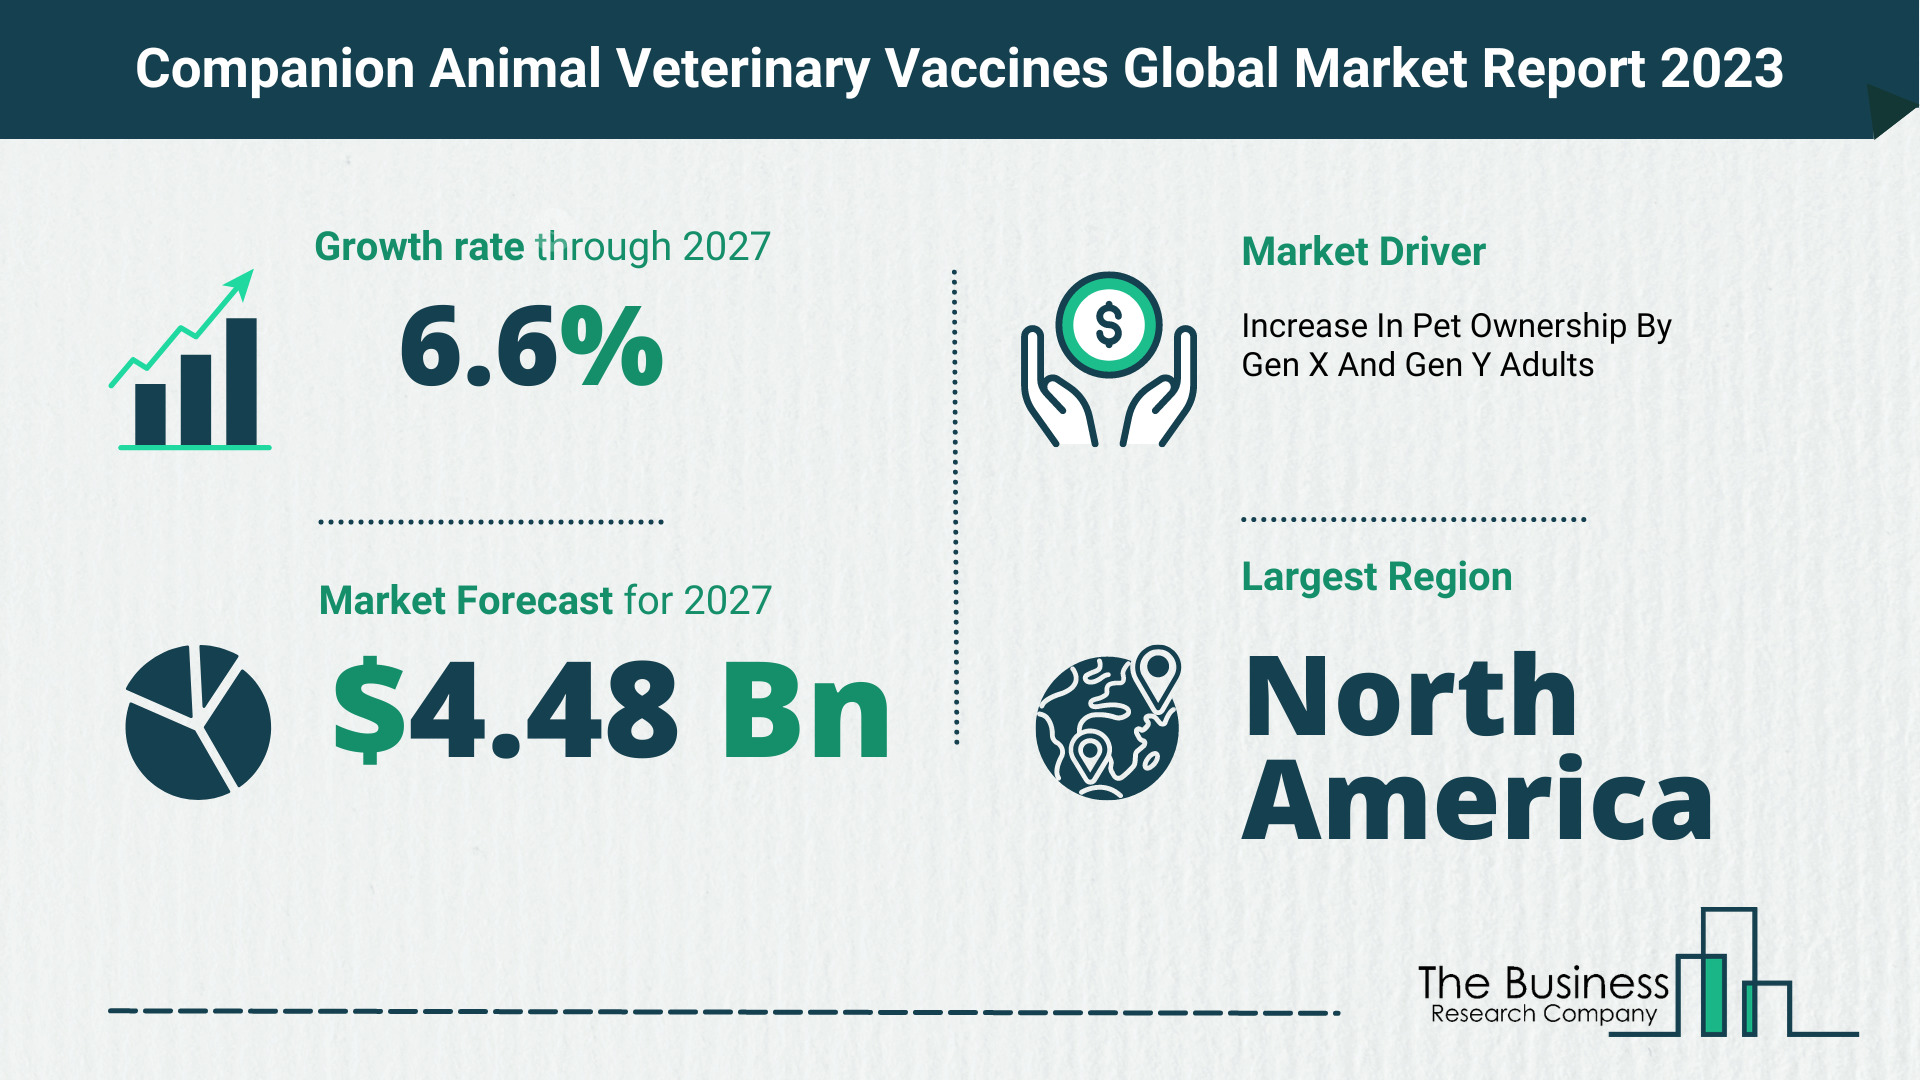 What Will The Companion Animal Veterinary Vaccines Market Look Like In 2023?